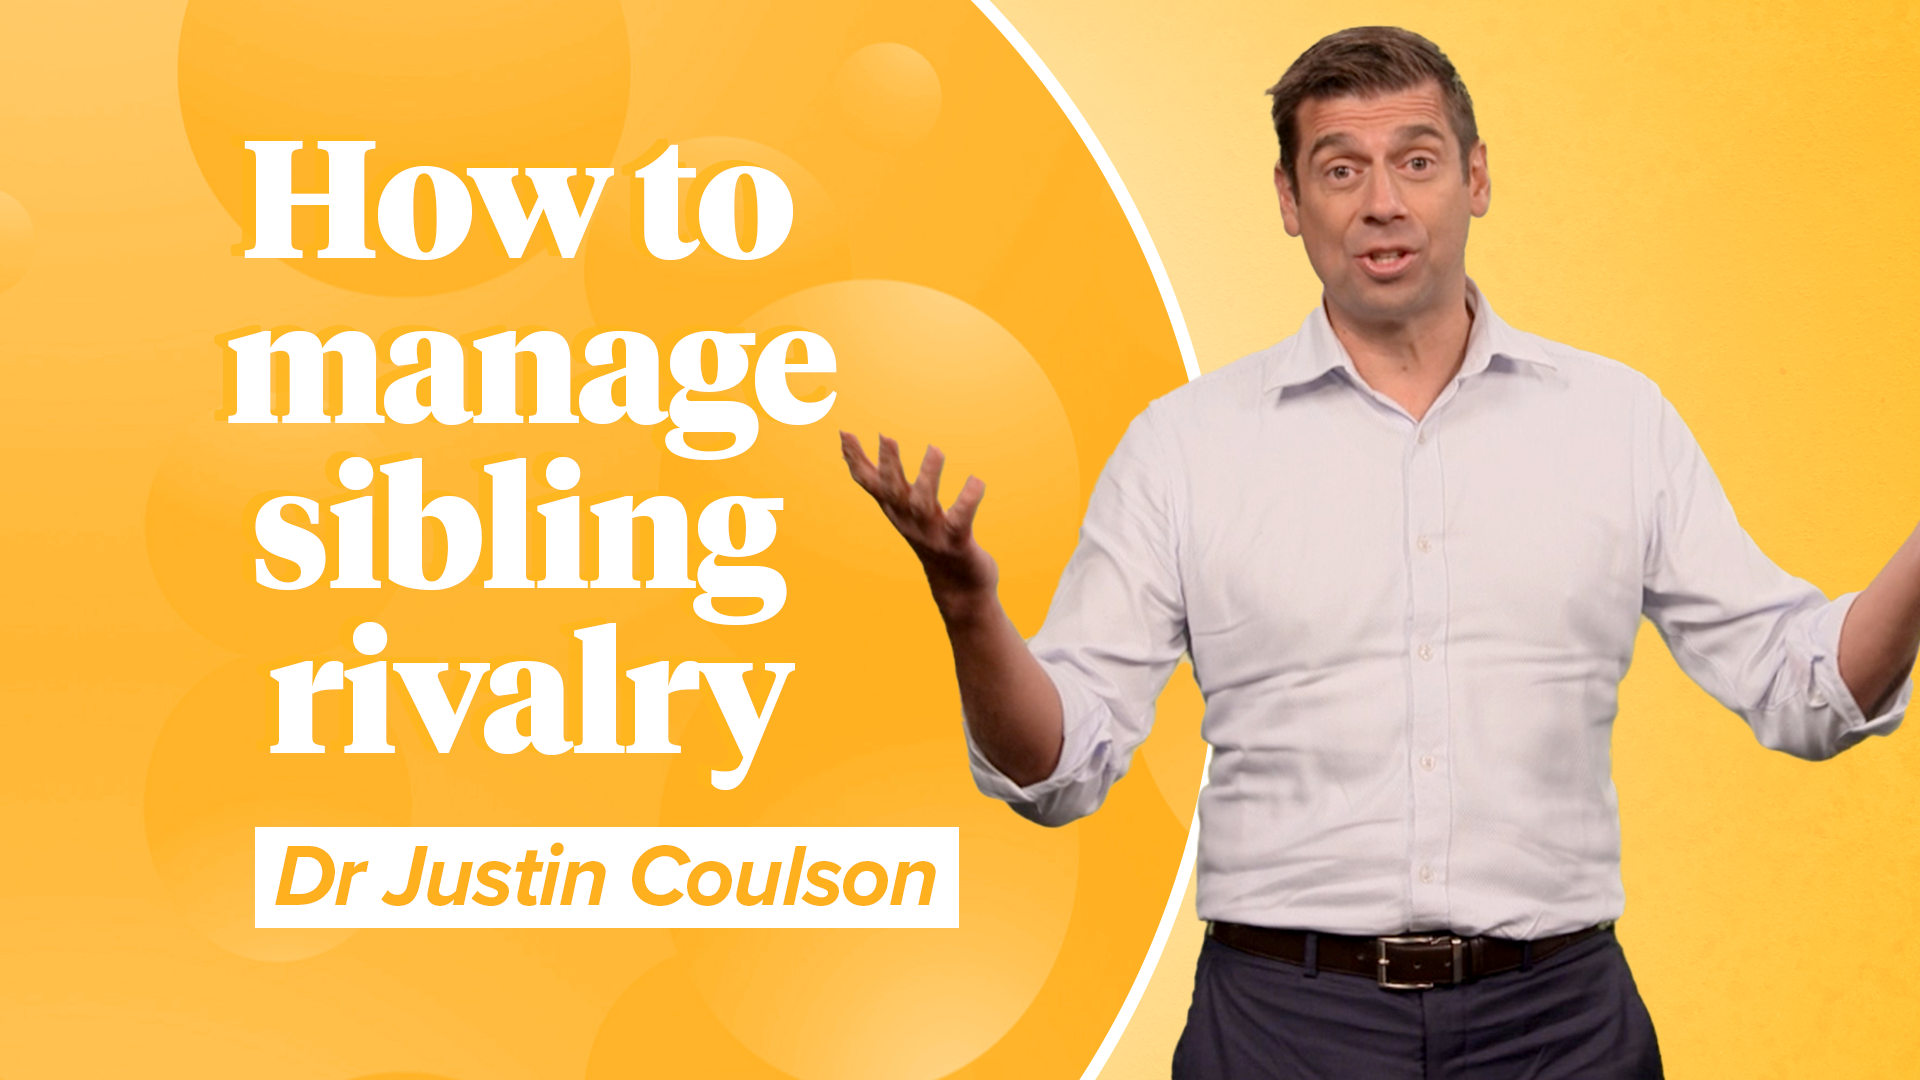 Dr Justin Coulson on how to manage sibling rivalry